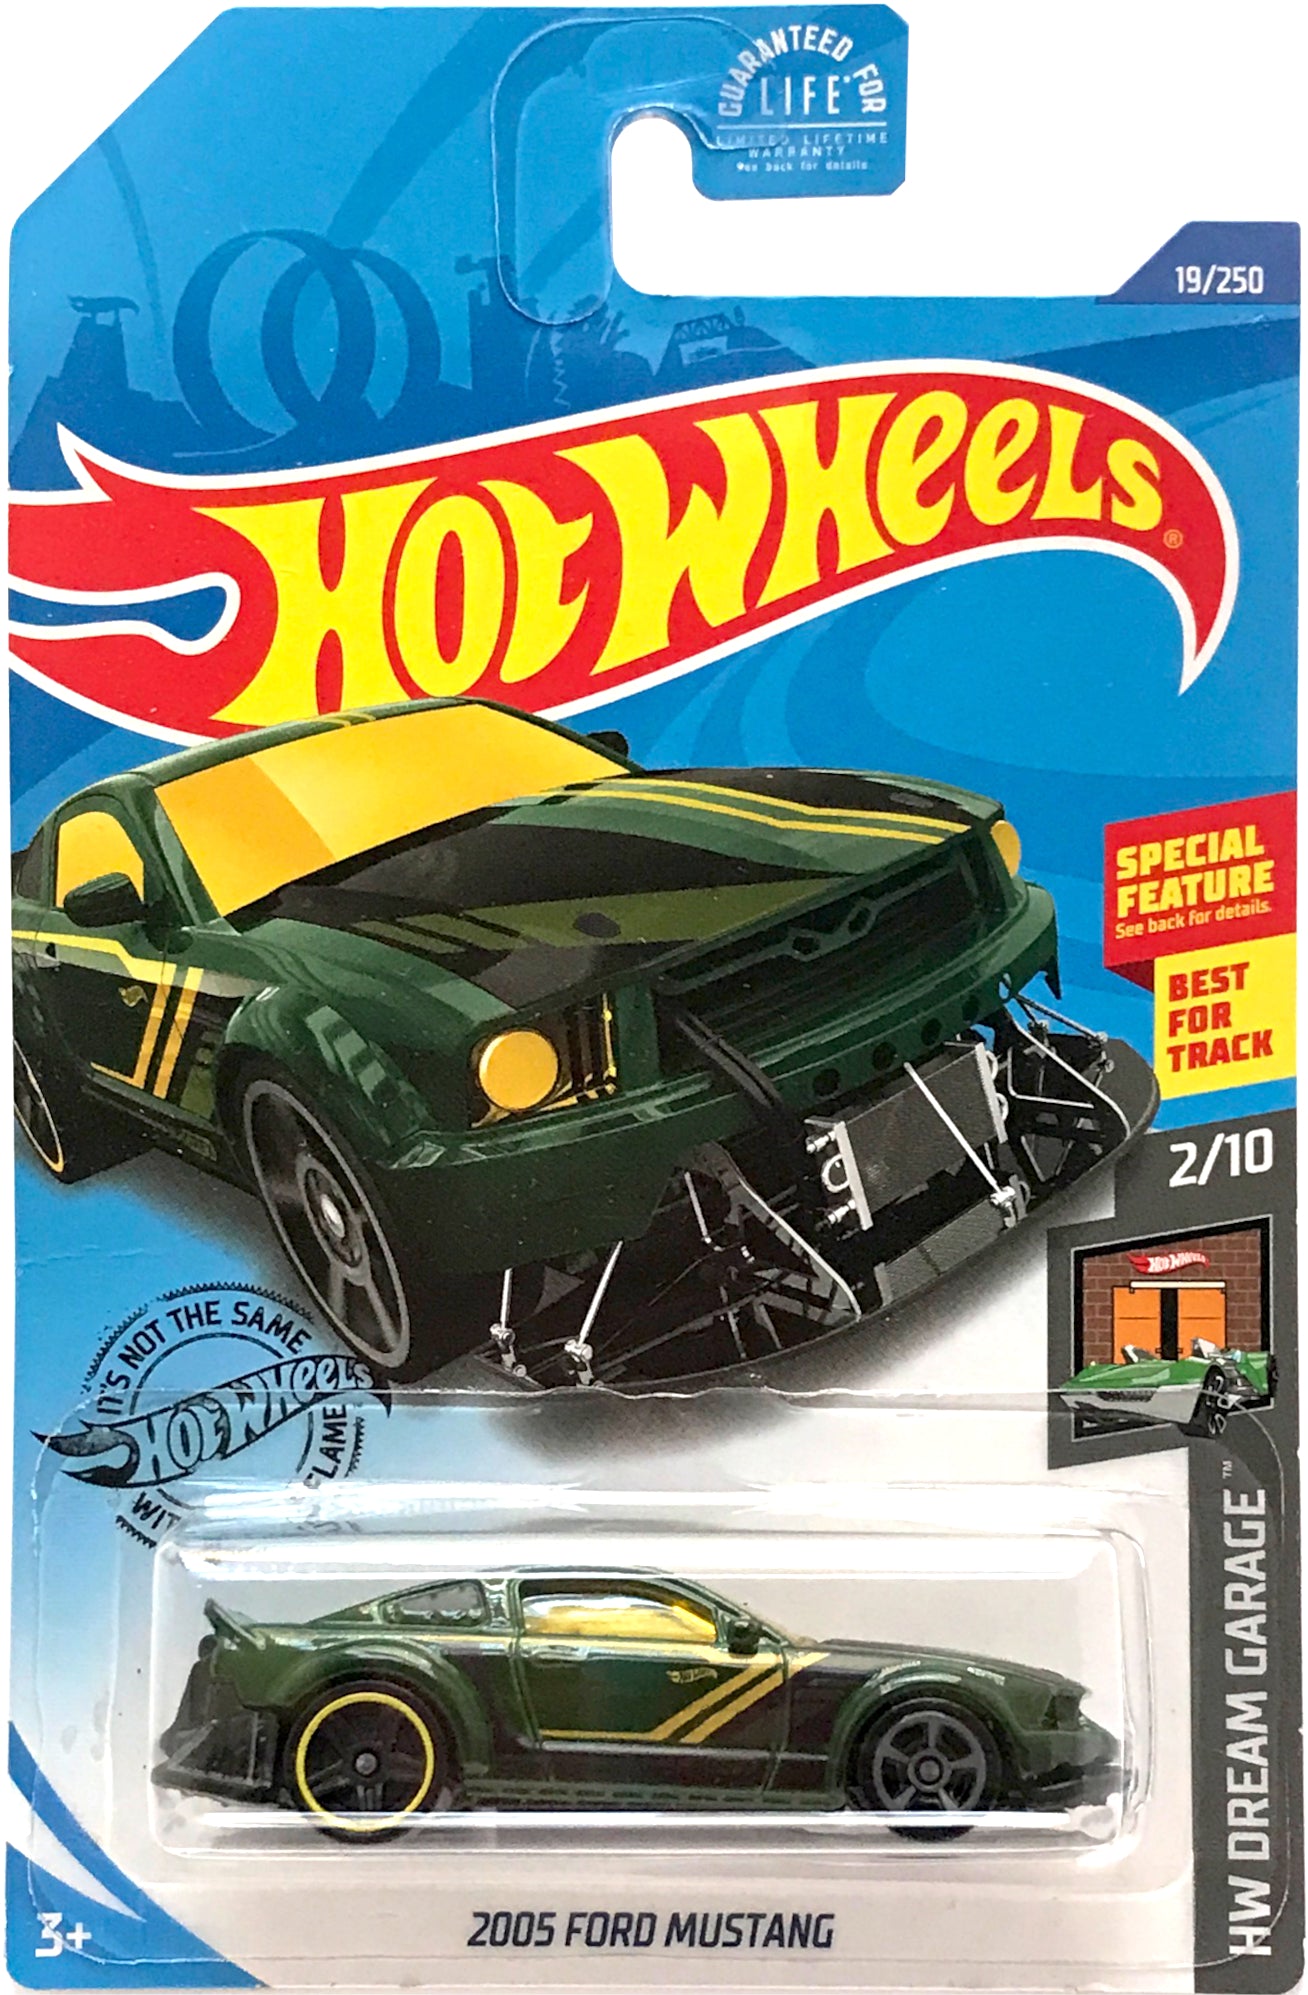 2020 Hot Wheels Mainline #019 - 2005 Ford Mustang (Green) GHF29